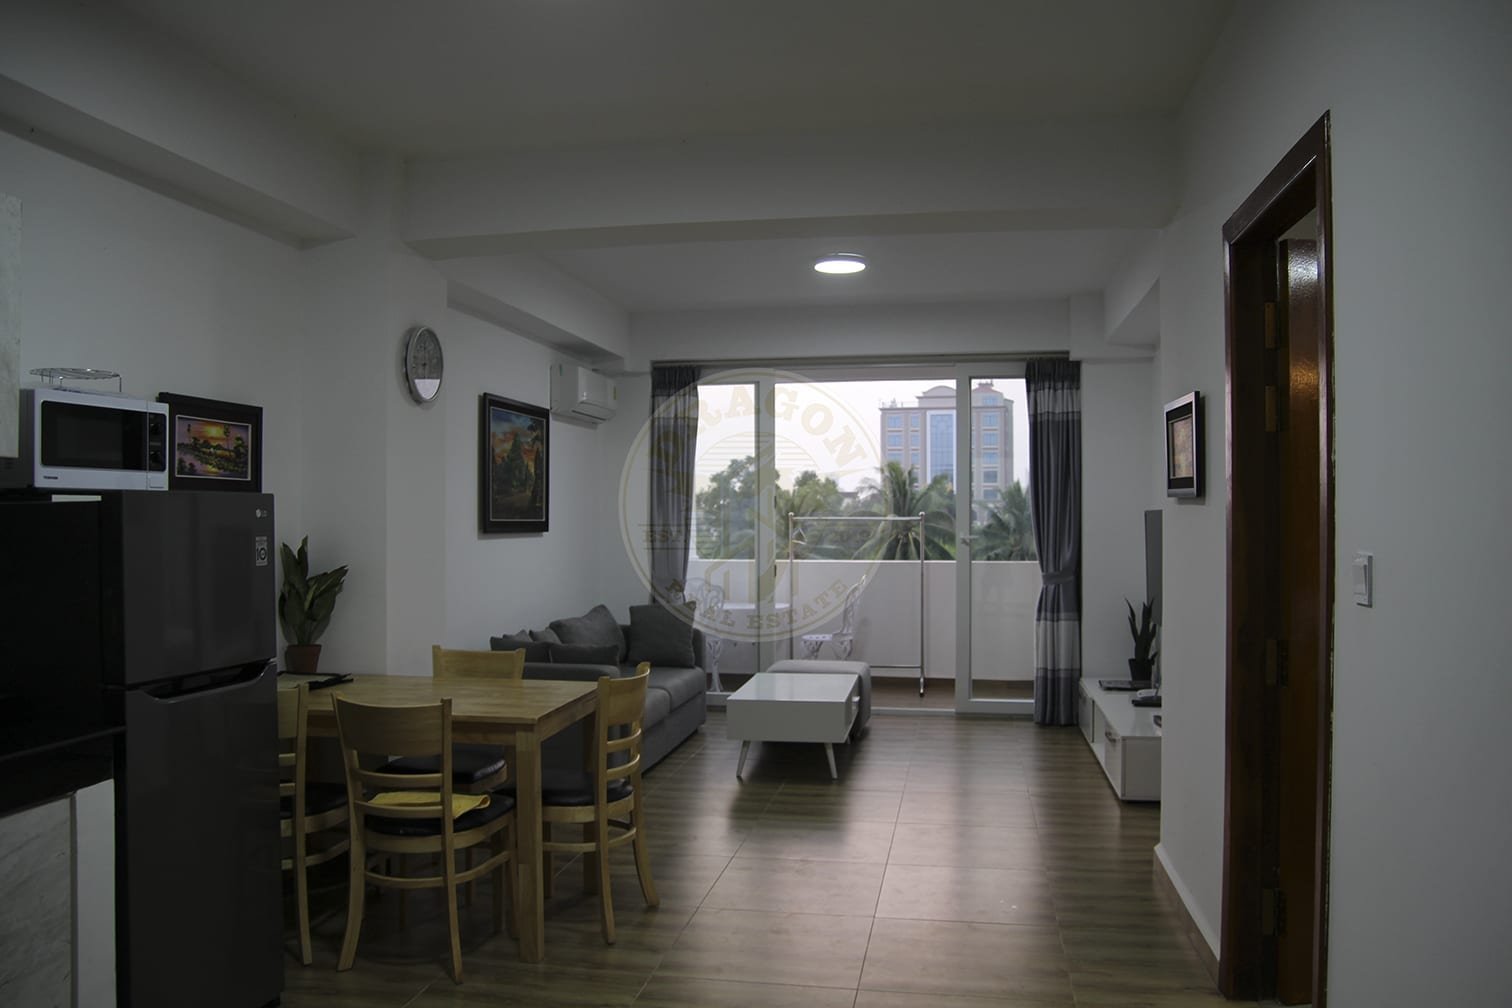 Location, Community, Quality Living Rent an Apartment in Sihanoukville. Real Estate Sihanoukville